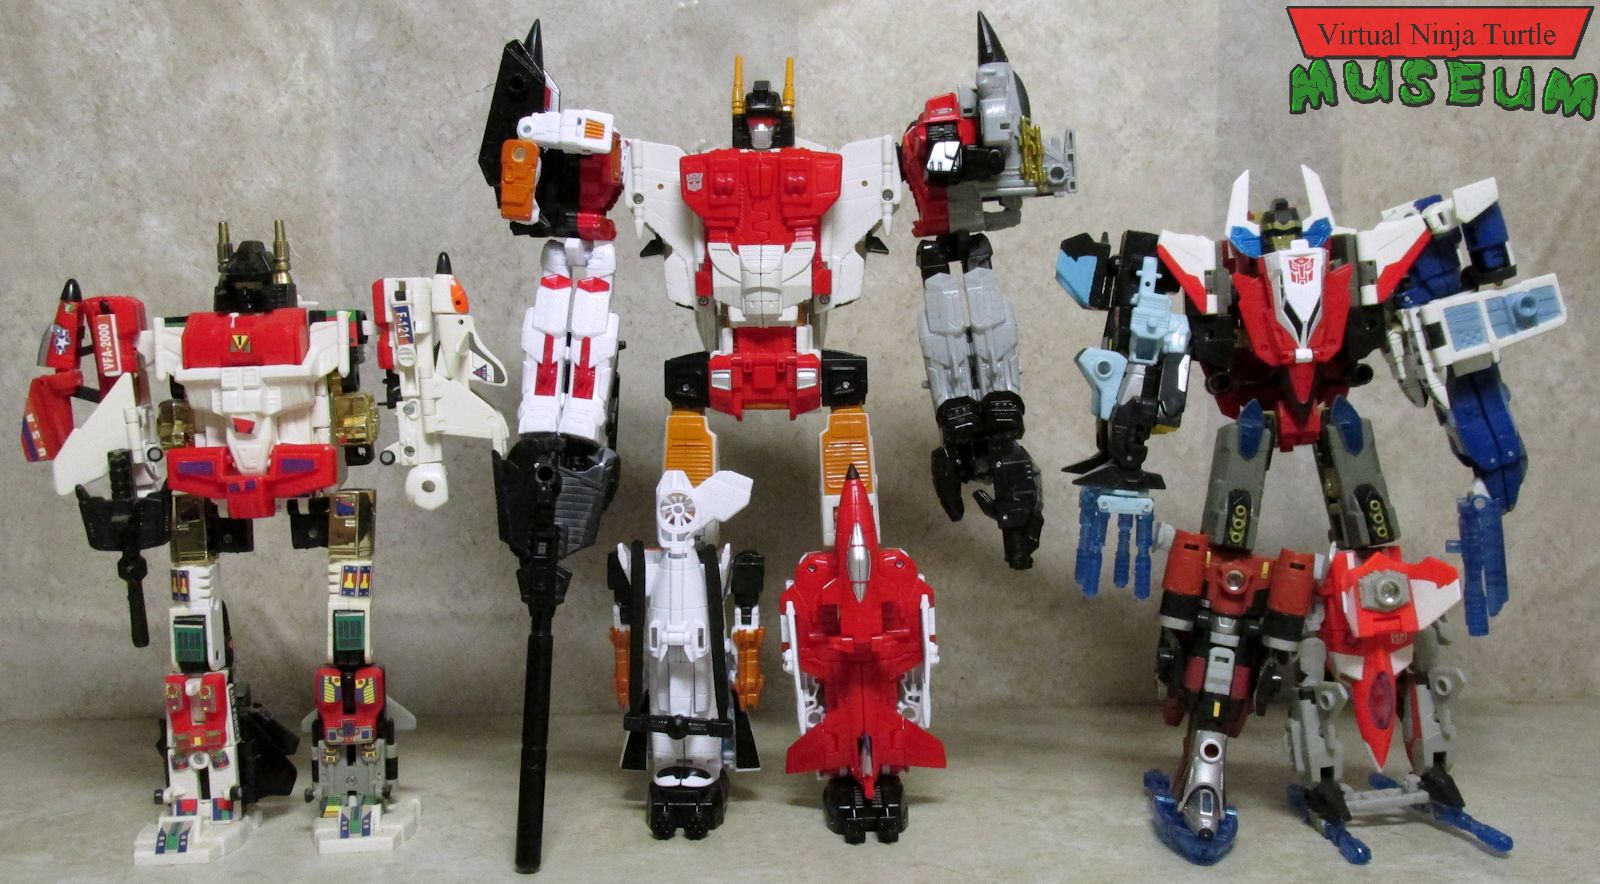 transformers combiner wars superion